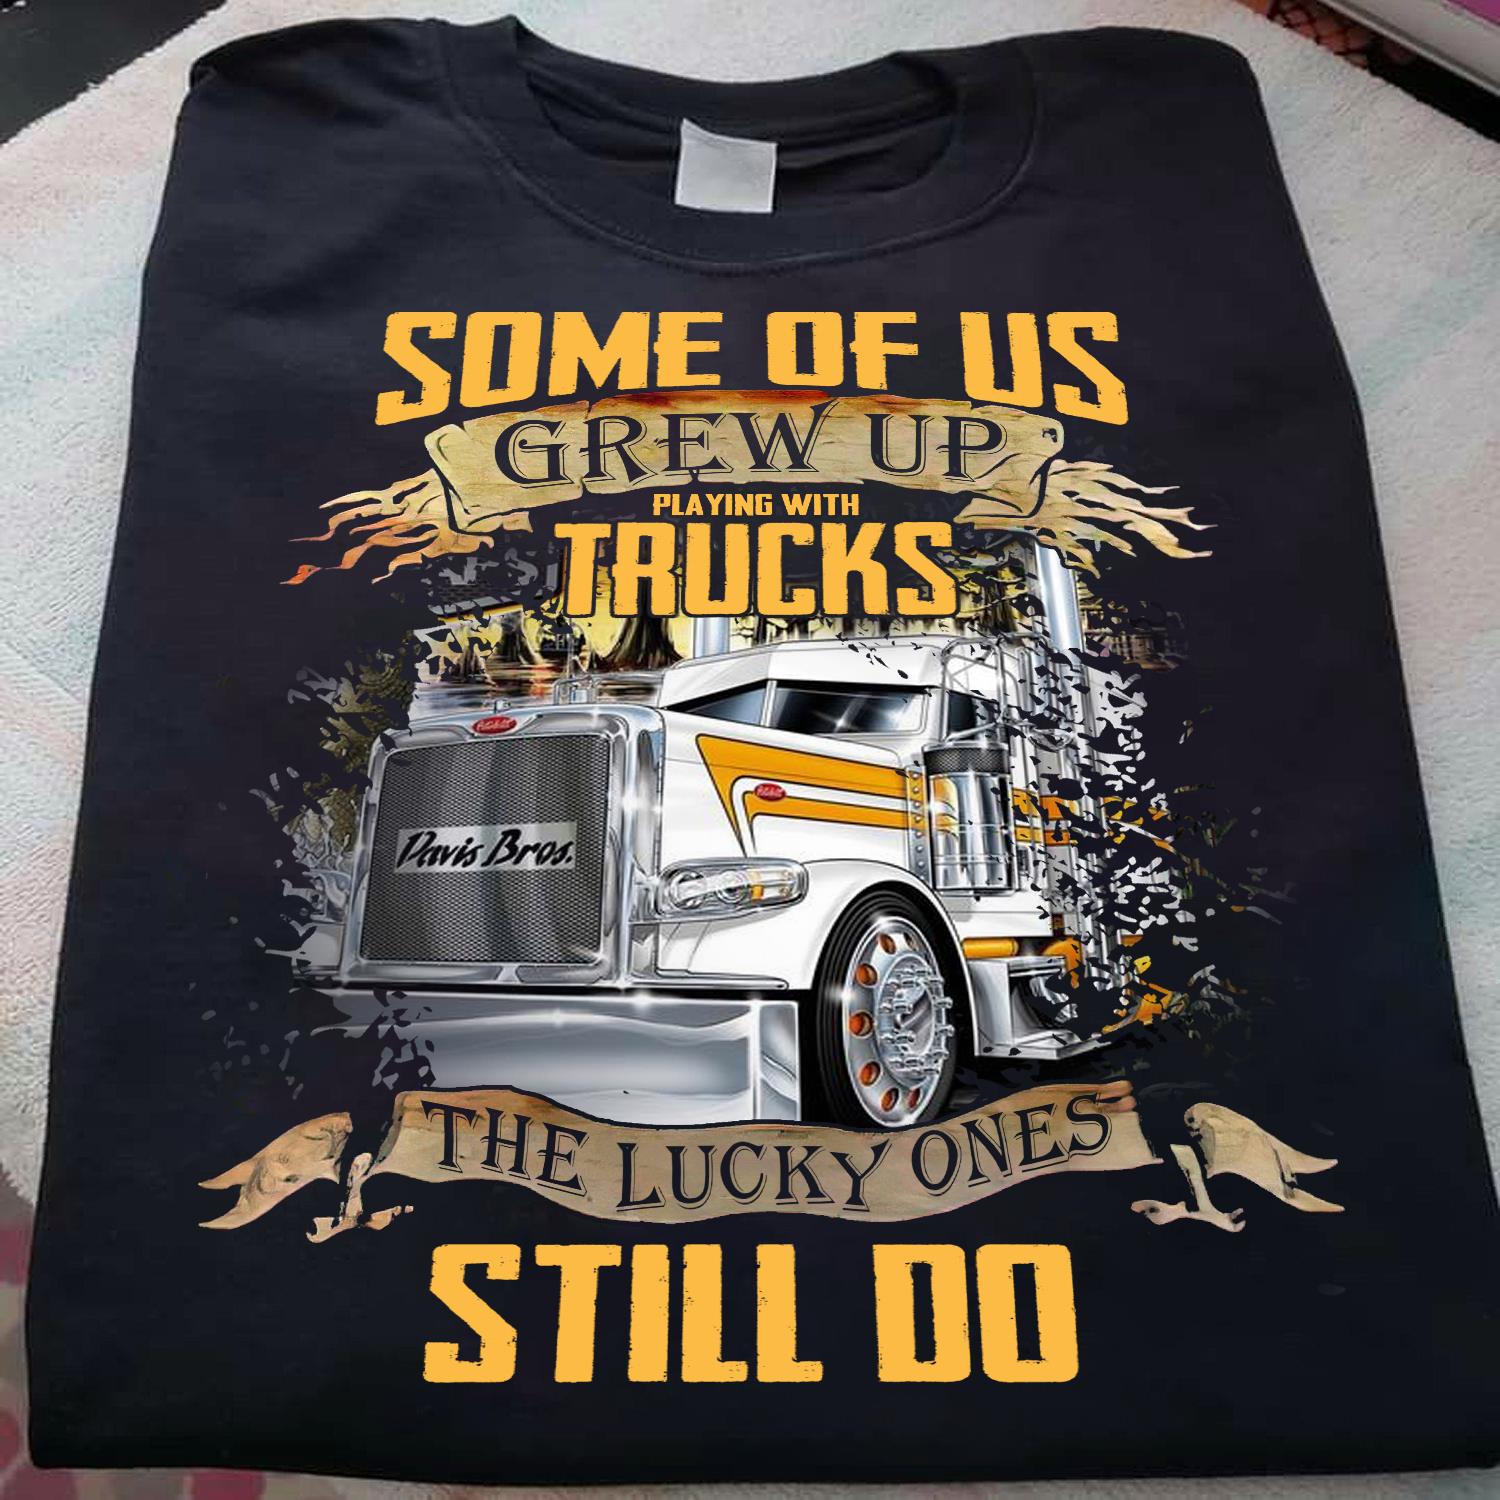 Some of us grew up playing with trucks the lucky ones still do - The trucker